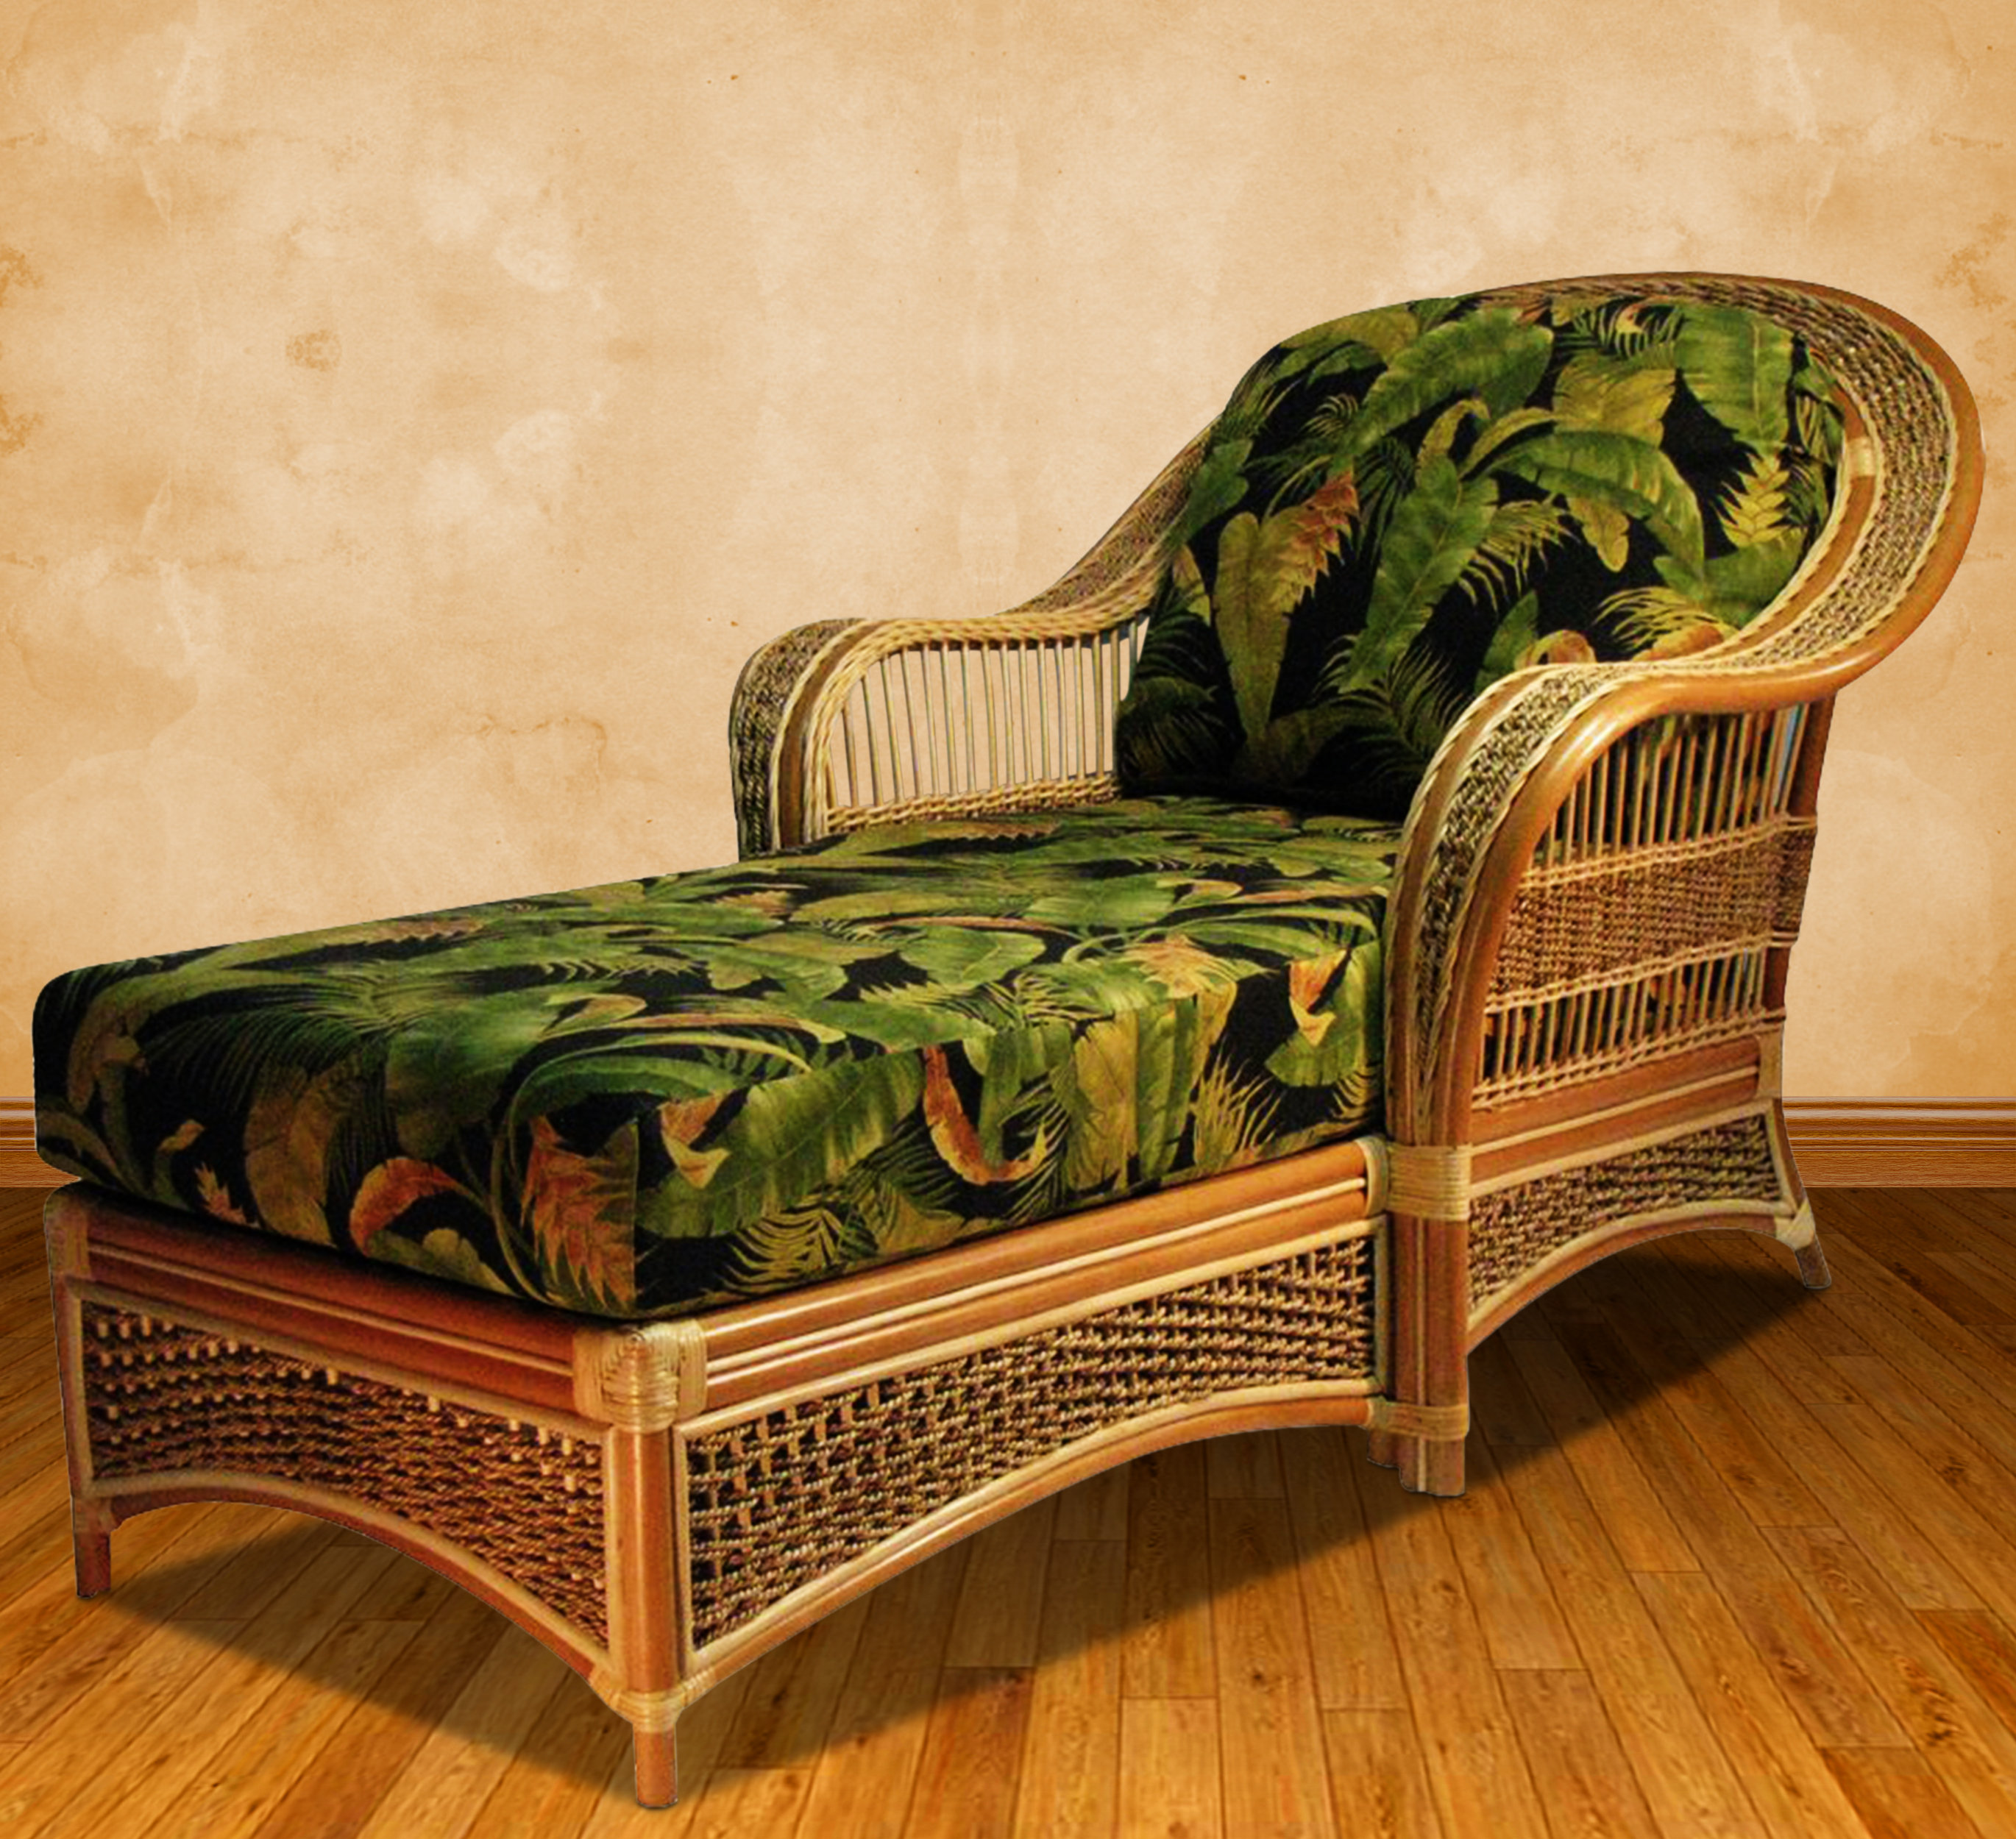 Slipcovered Chaise Lounge